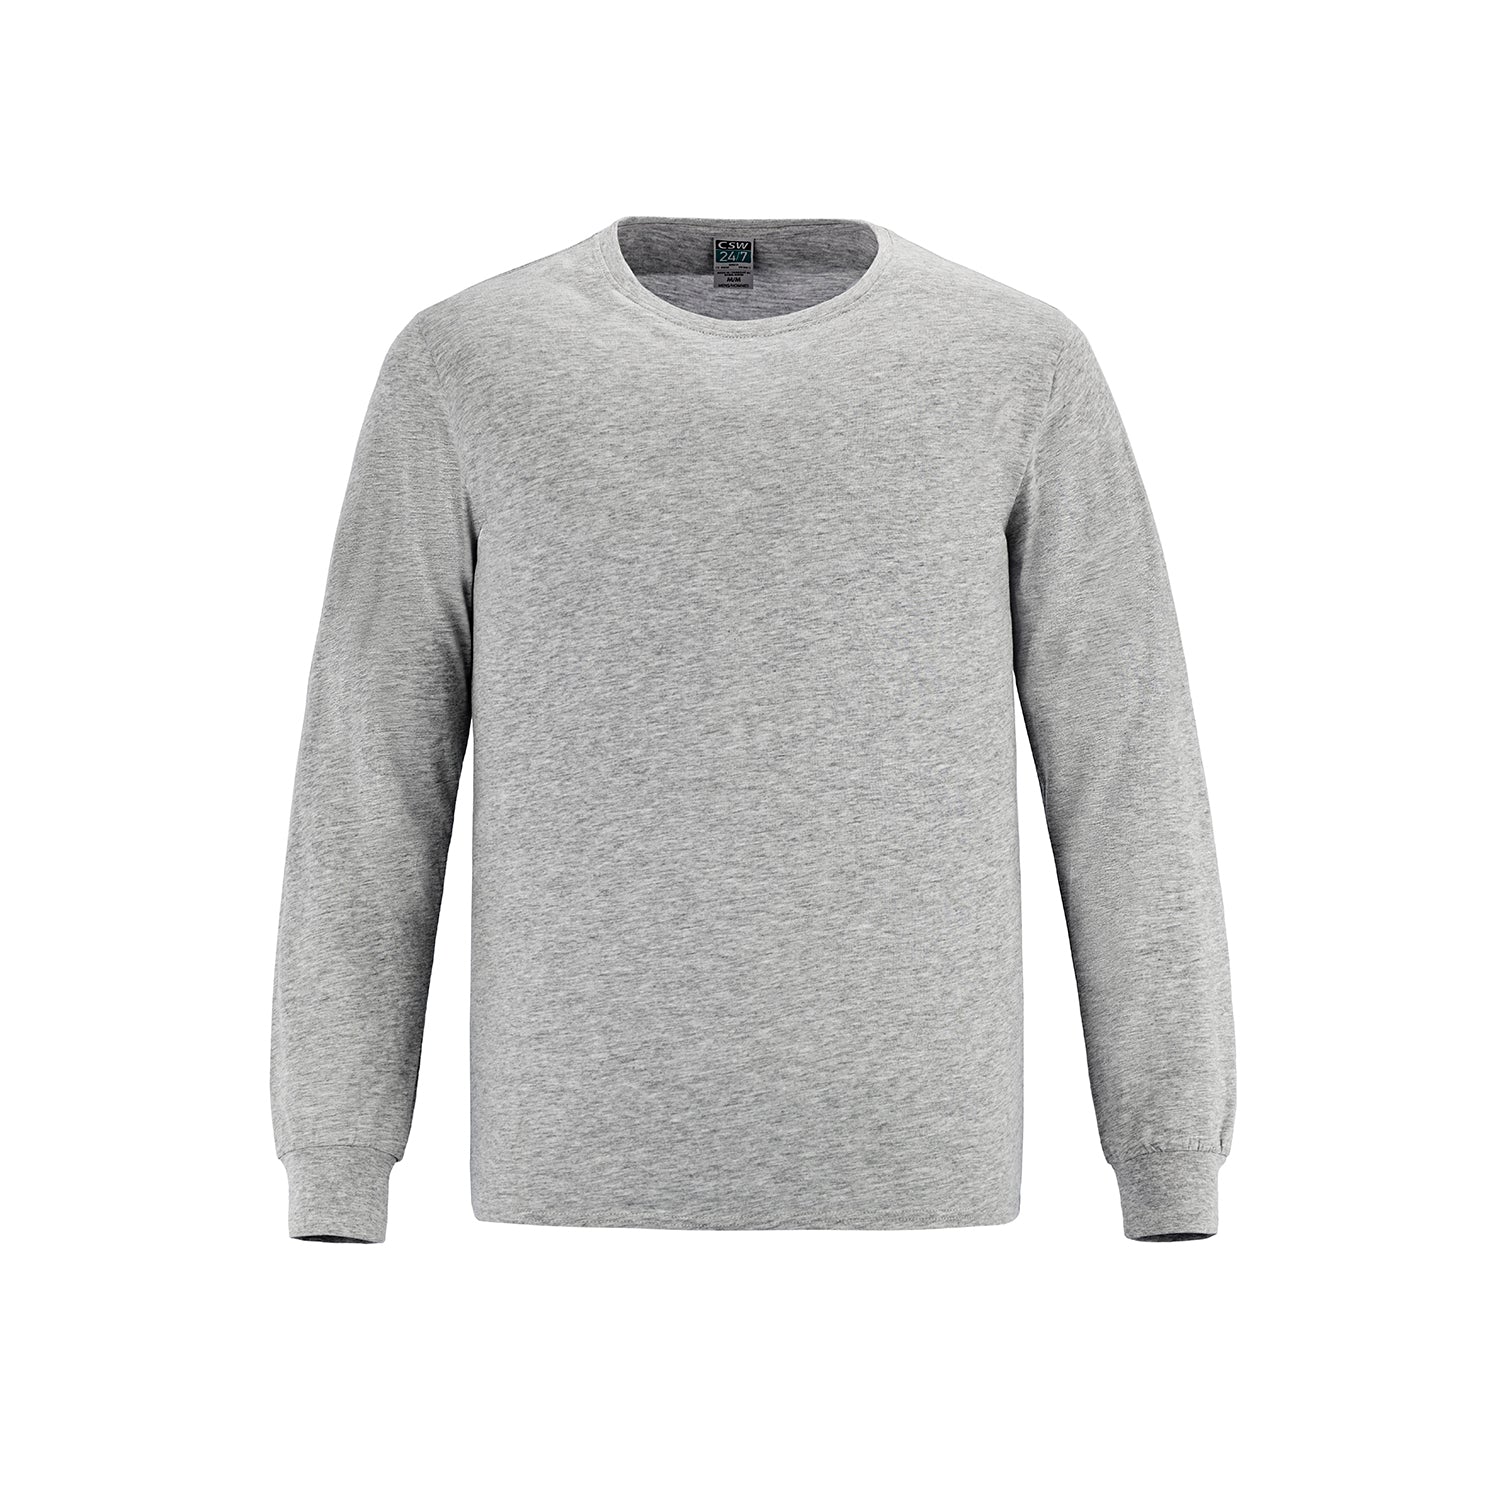 S5615Y - Breeze - Youth Long Sleeve Crewneck Ring Spun Combed Cotton Tee -  – Toronto Apparel